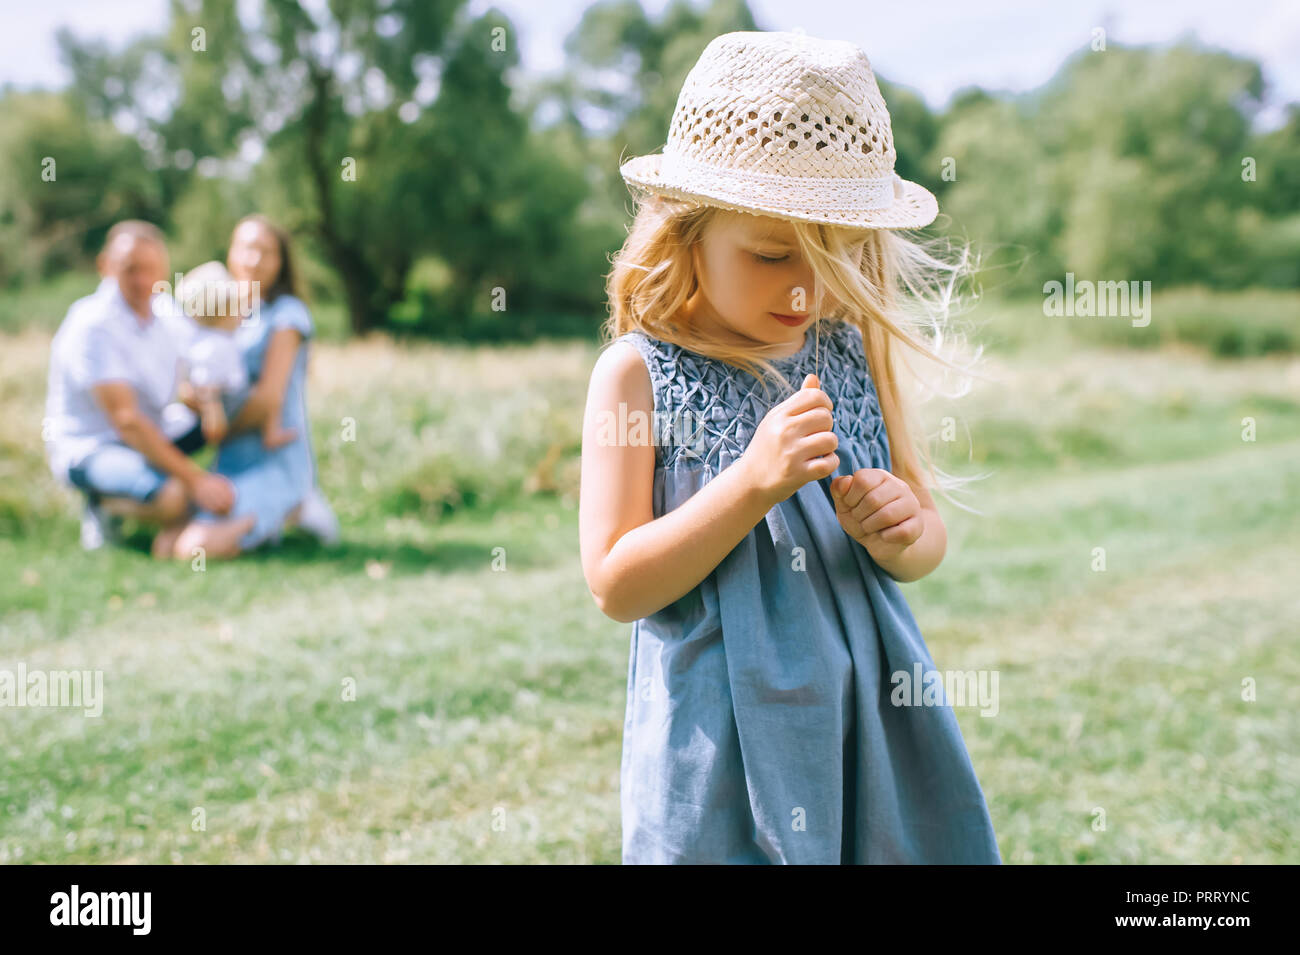 Toddler with Blonde Hair and Straw Hat - wide 7